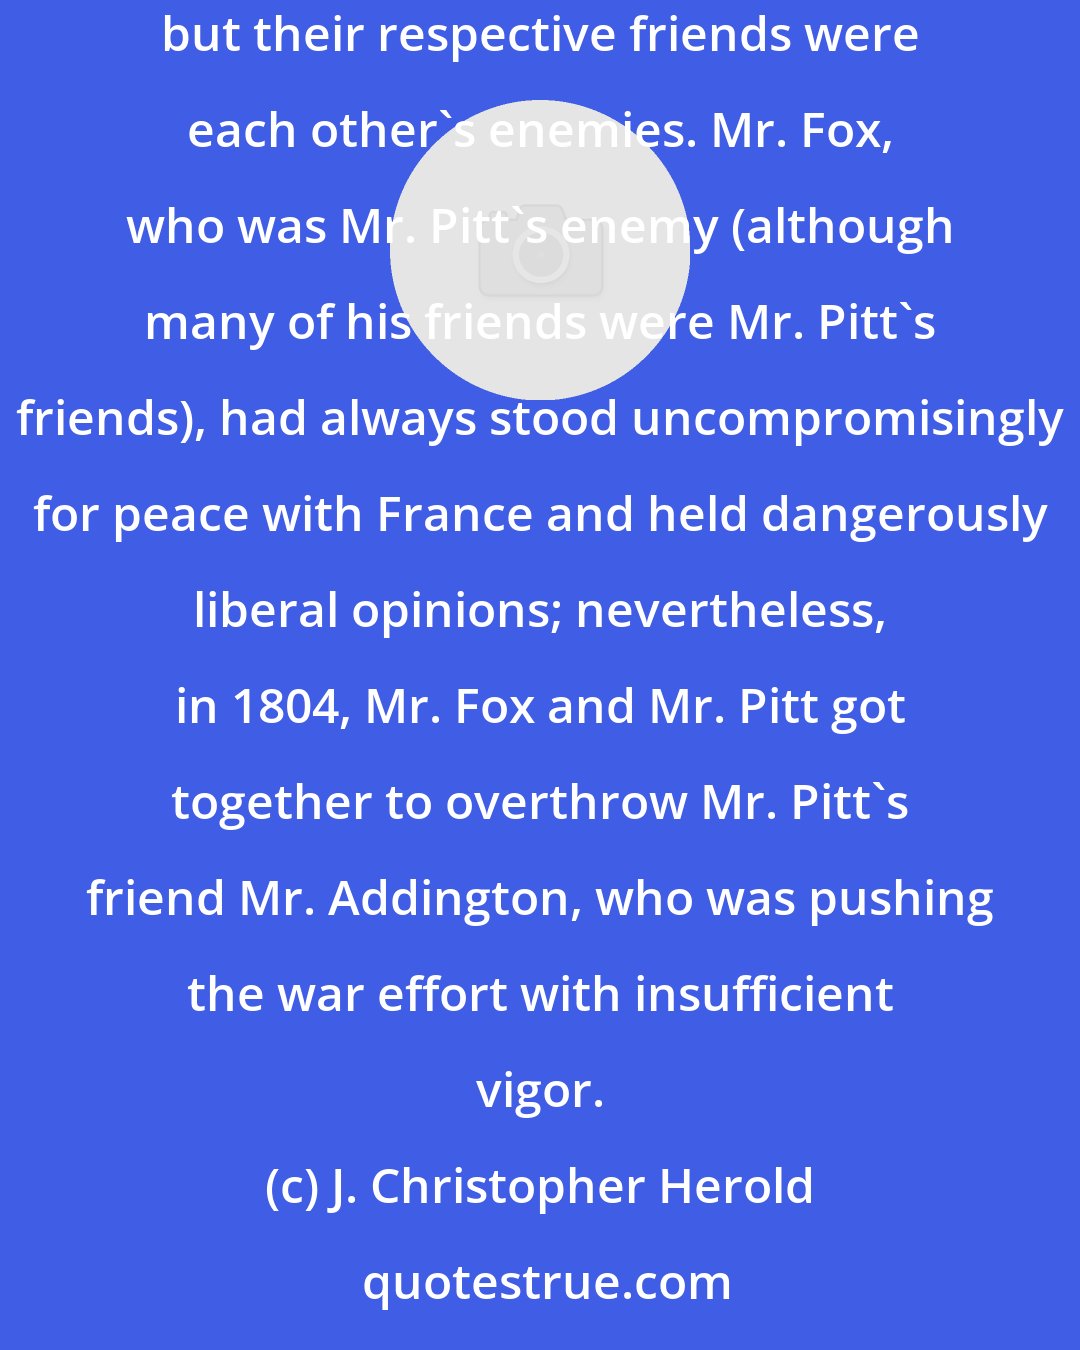 J. Christopher Herold: His [Pitt's] successor as prime minister was Mr. Addington, who was a friend of Mr. Pitt, just as Mr. Pitt was a friend of Mr. Addington; but their respective friends were each other's enemies. Mr. Fox, who was Mr. Pitt's enemy (although many of his friends were Mr. Pitt's friends), had always stood uncompromisingly for peace with France and held dangerously liberal opinions; nevertheless, in 1804, Mr. Fox and Mr. Pitt got together to overthrow Mr. Pitt's friend Mr. Addington, who was pushing the war effort with insufficient vigor.